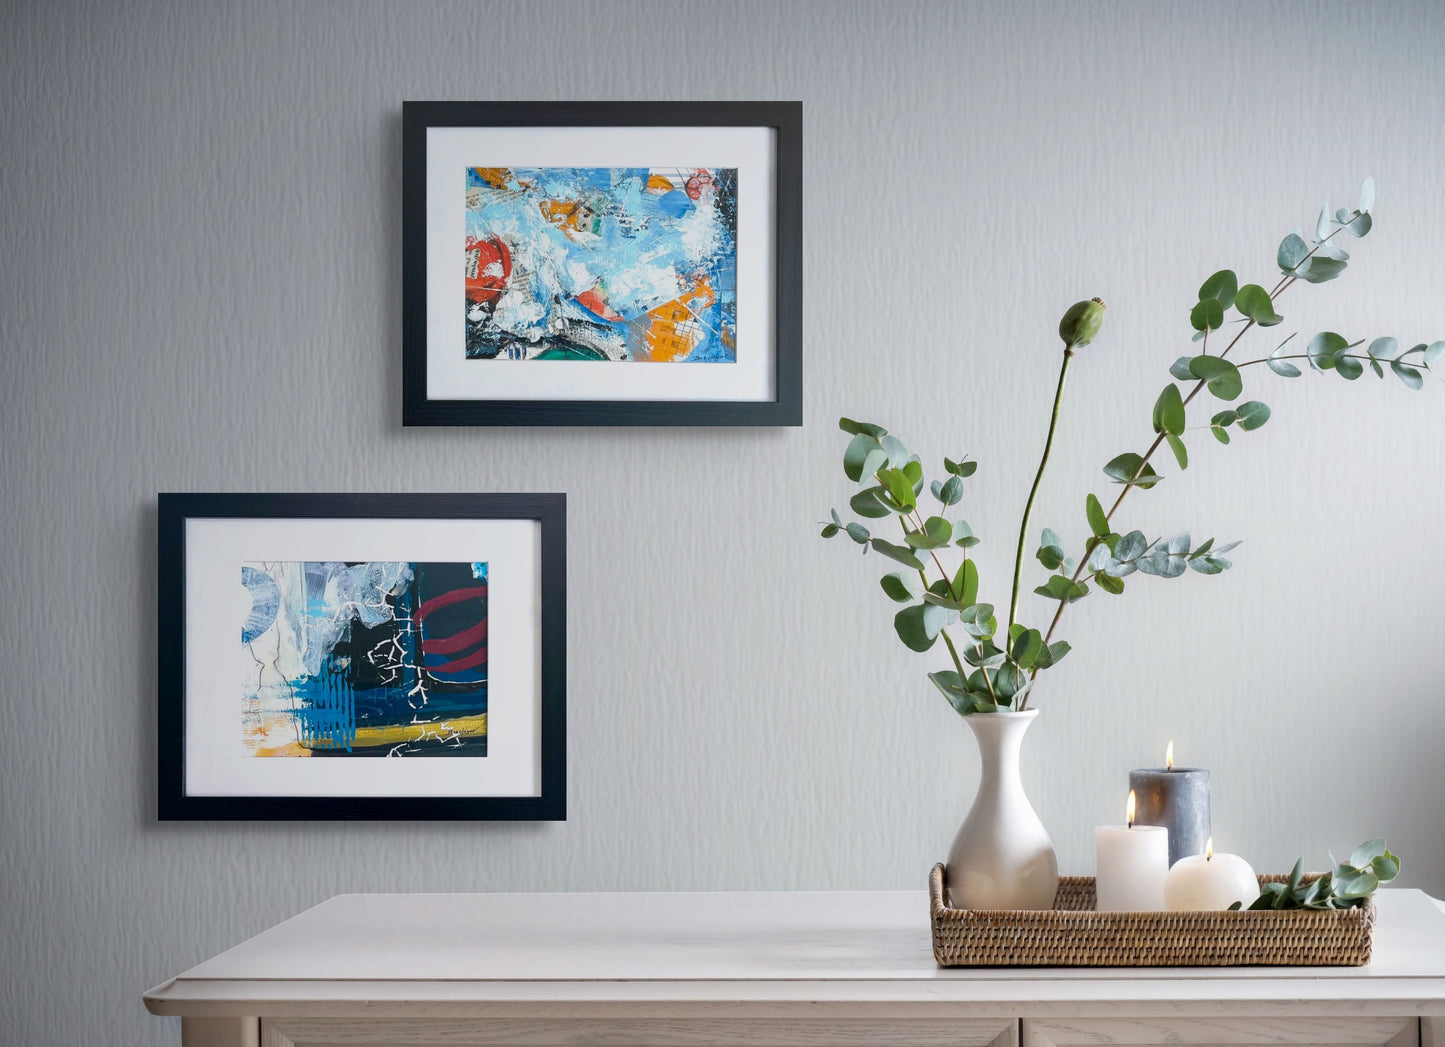 Colorful abstract painting using acrylic; predominant blue and white, with touch of red and yellow; artist Bob Hogue; 8"x10" and w/black wood frame and white mat 11"x 14"; shown in situ on wall paired with a second abstract painting by the artist